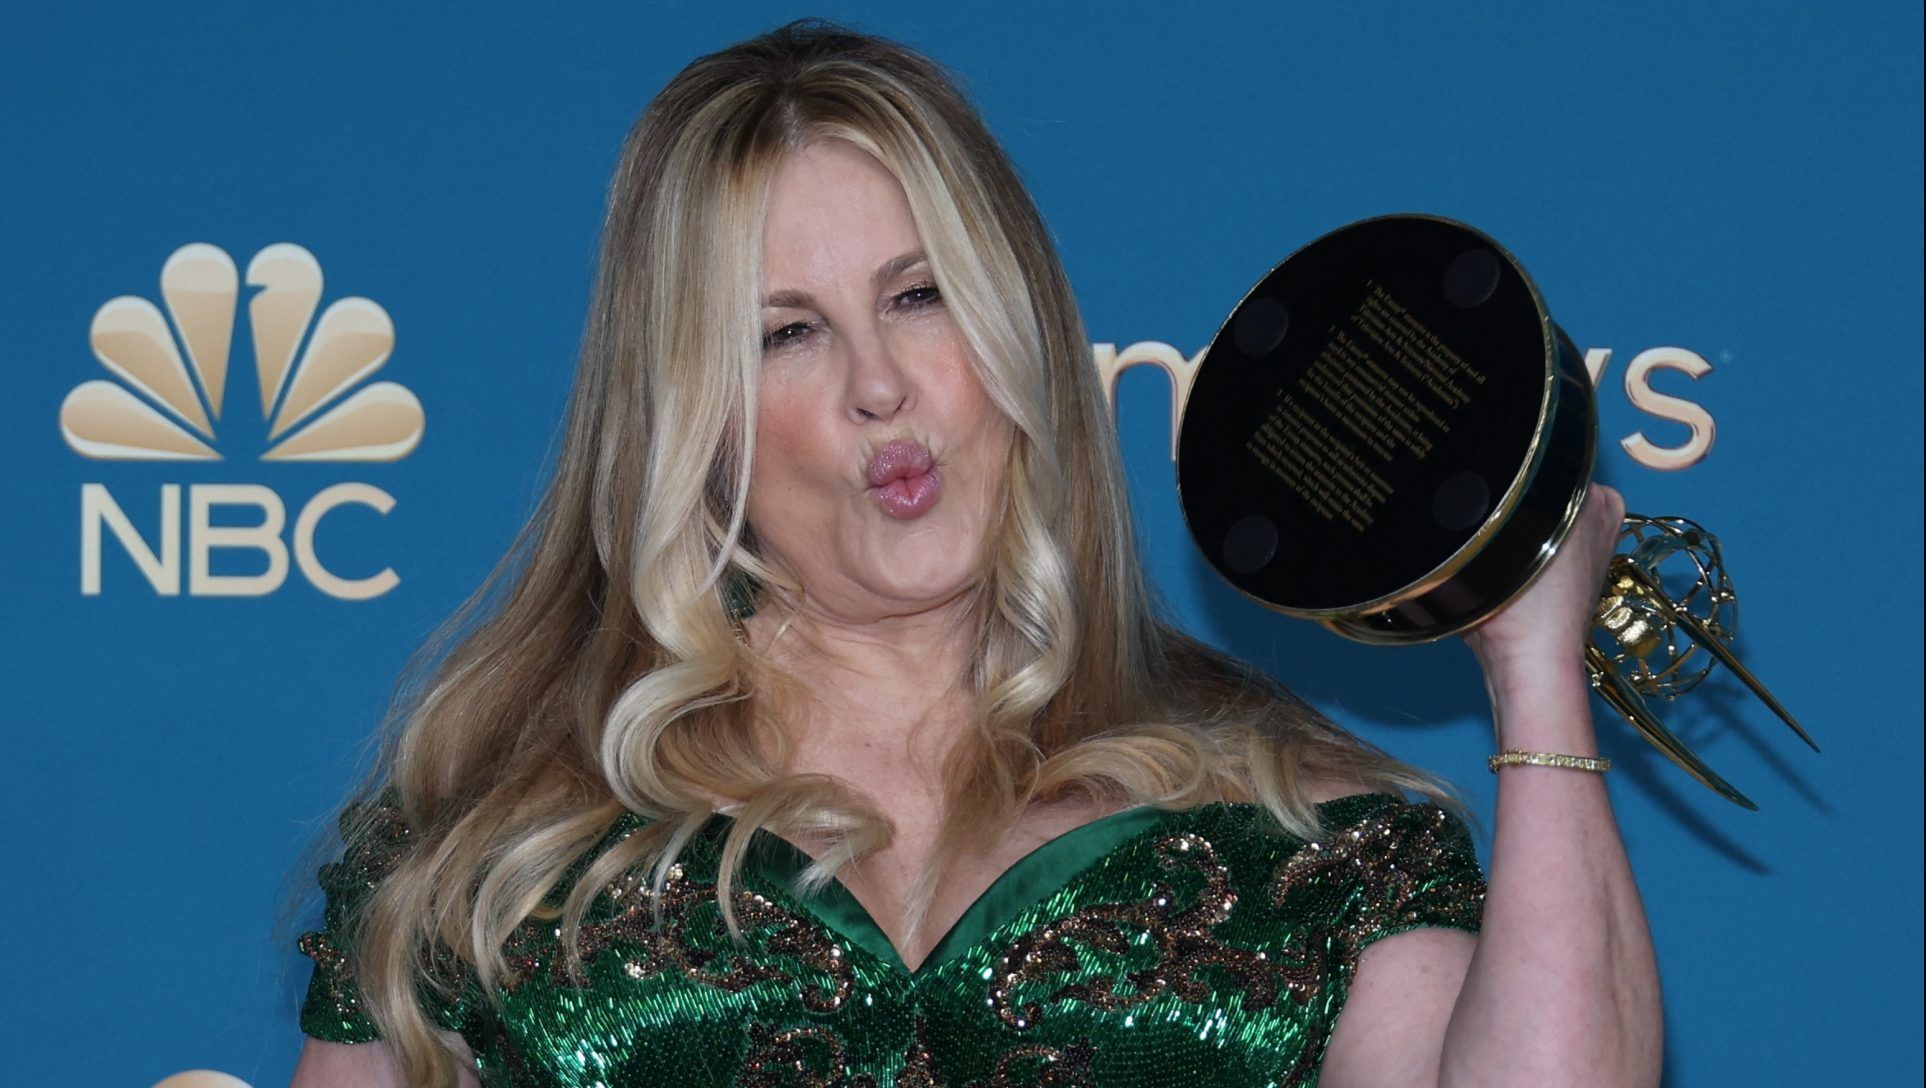 Jennifer Coolidge holds her Emmy for Outstanding Supporting Actress for "The White Lotus" at the 74th Primetime Emmy Awards. REUTERS/Aude Guerrucci